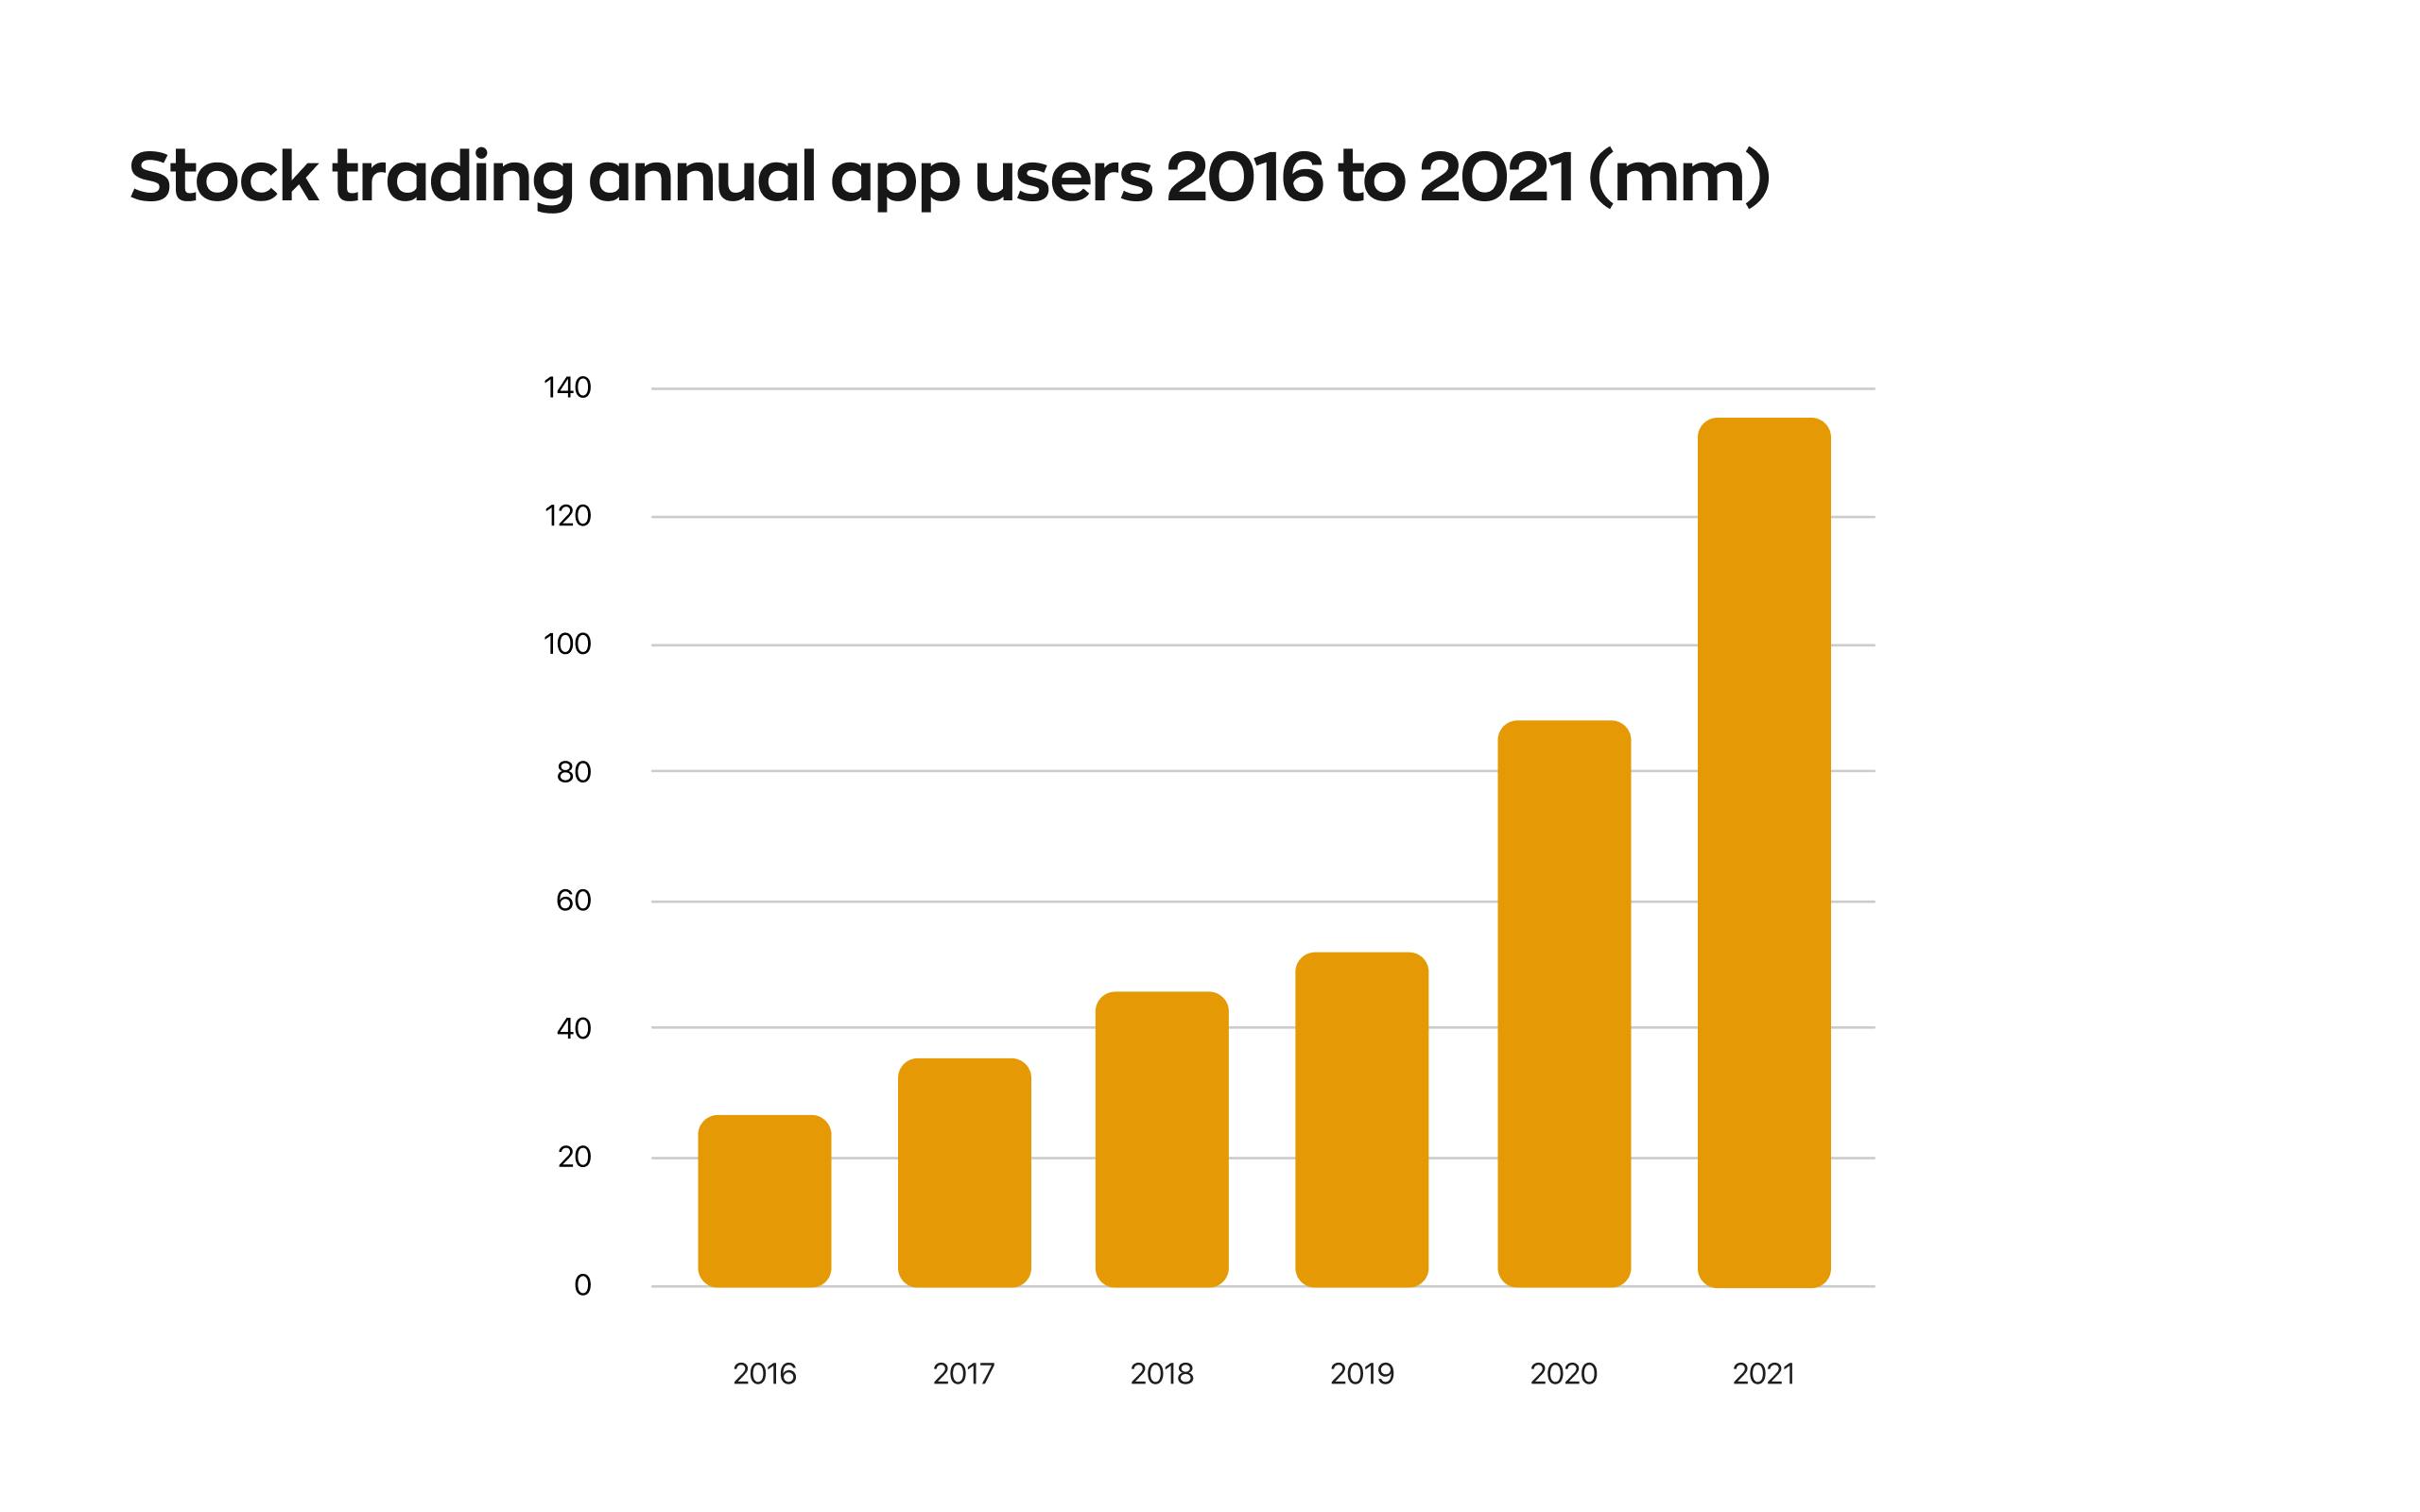 The number of stock trading annual app users.